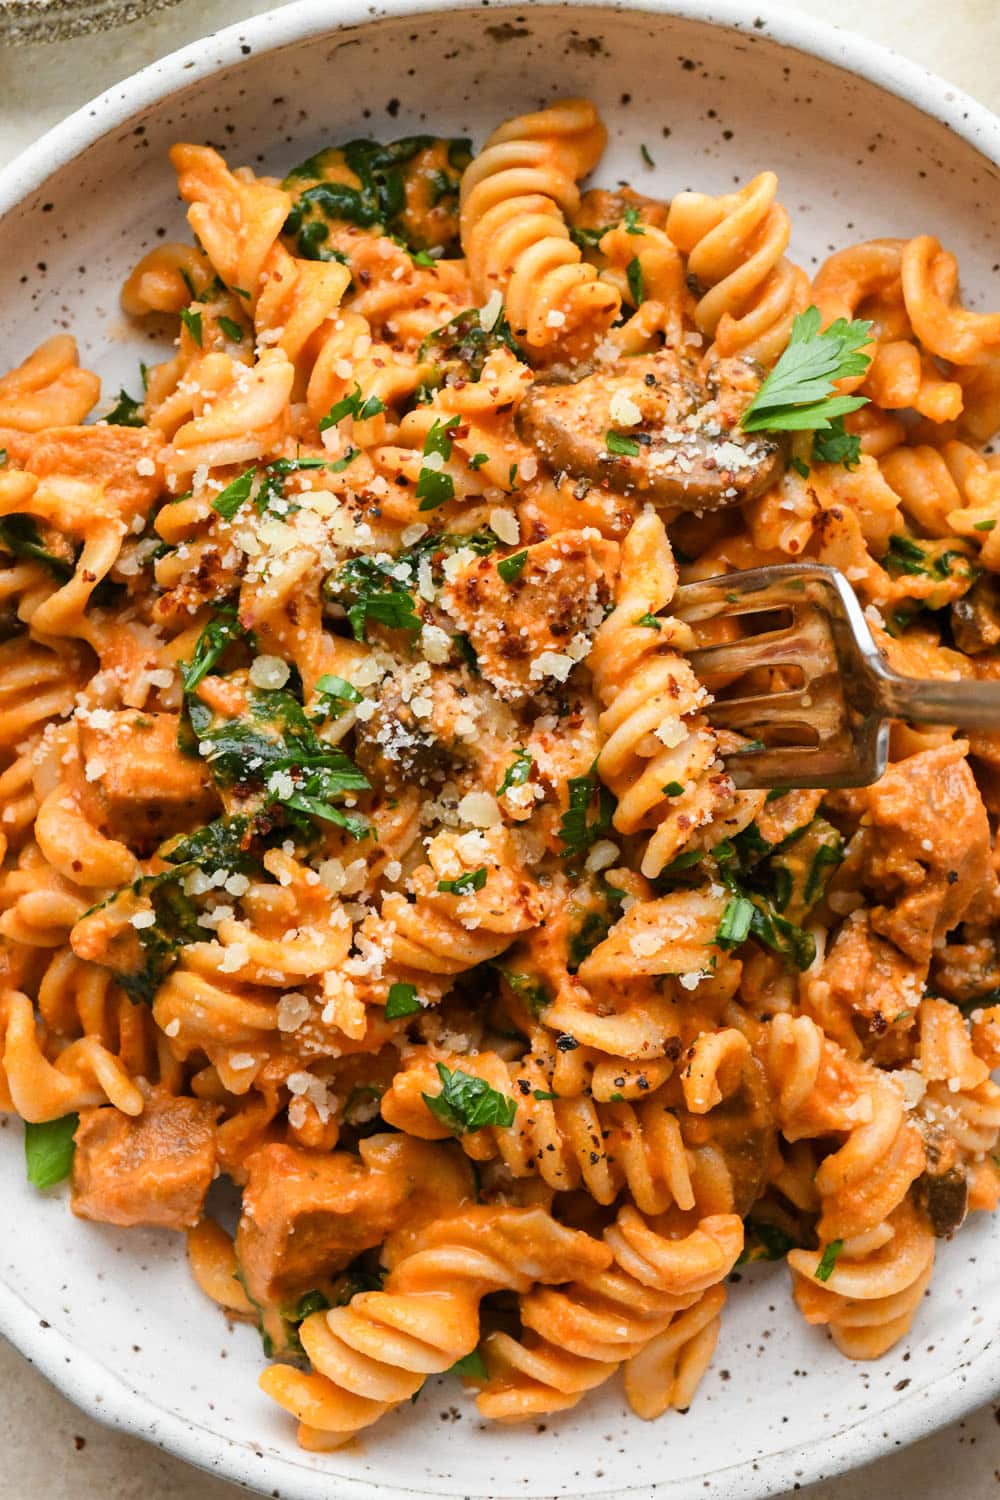 Creamy tomato sausage pasta in a shallow white speckled bowl, topped with dairy free parmesan, chili flakes, and a fresh herbs, with a fork lifting out a bite of pasta.